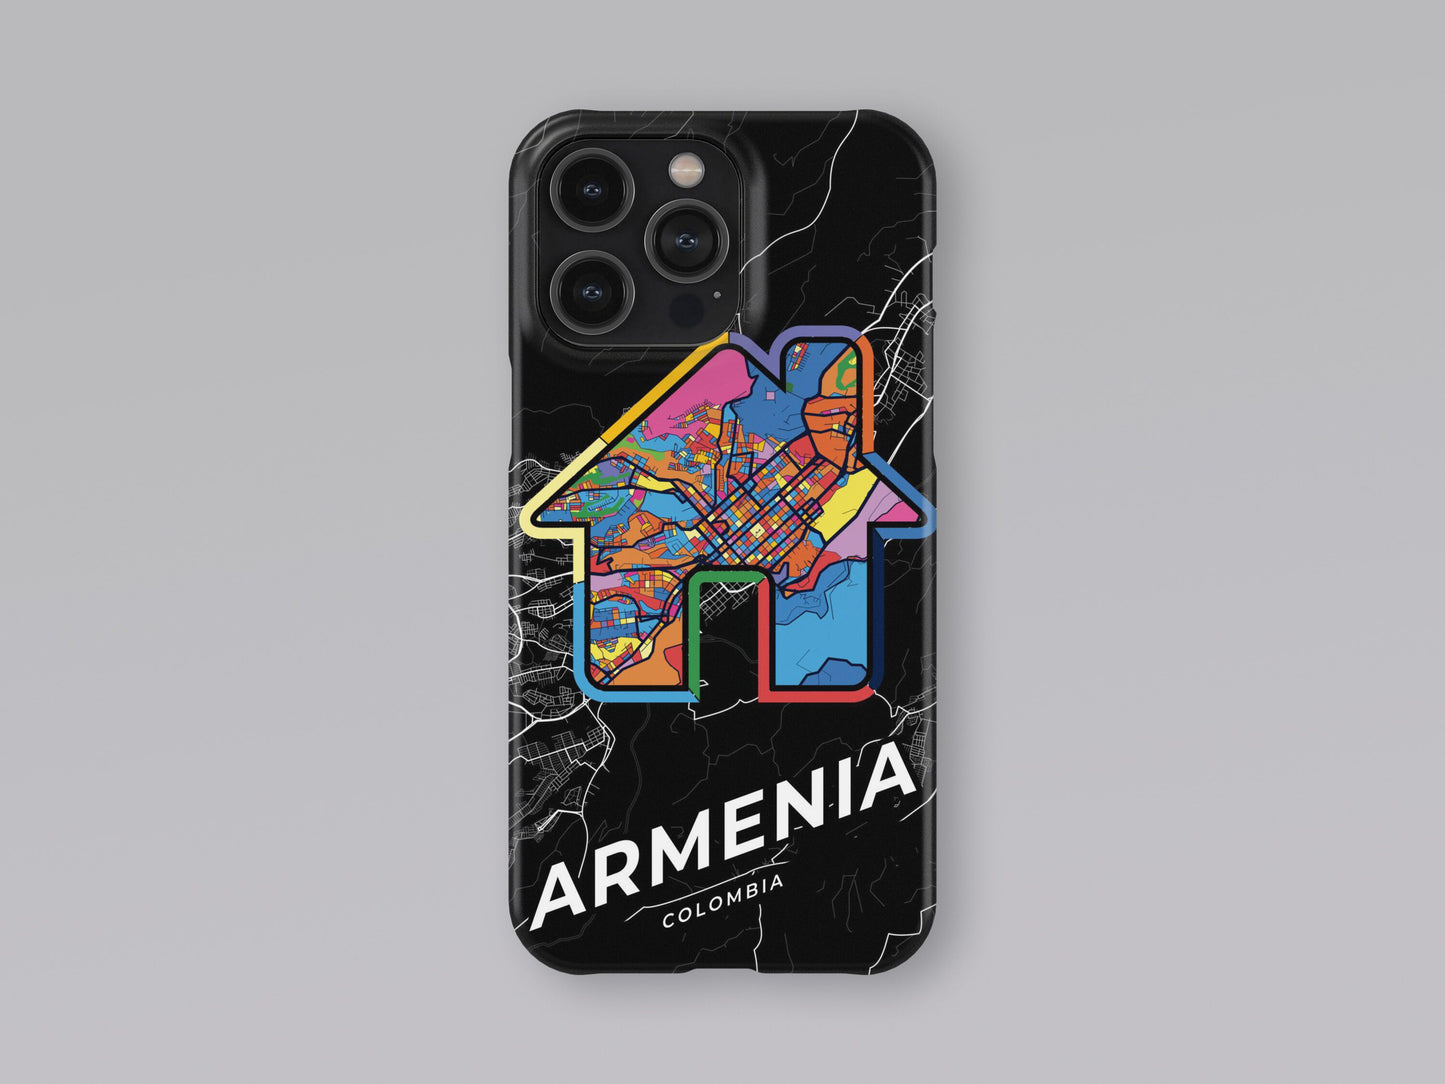 Armenia Colombia slim phone case with colorful icon. Birthday, wedding or housewarming gift. Couple match cases. 3